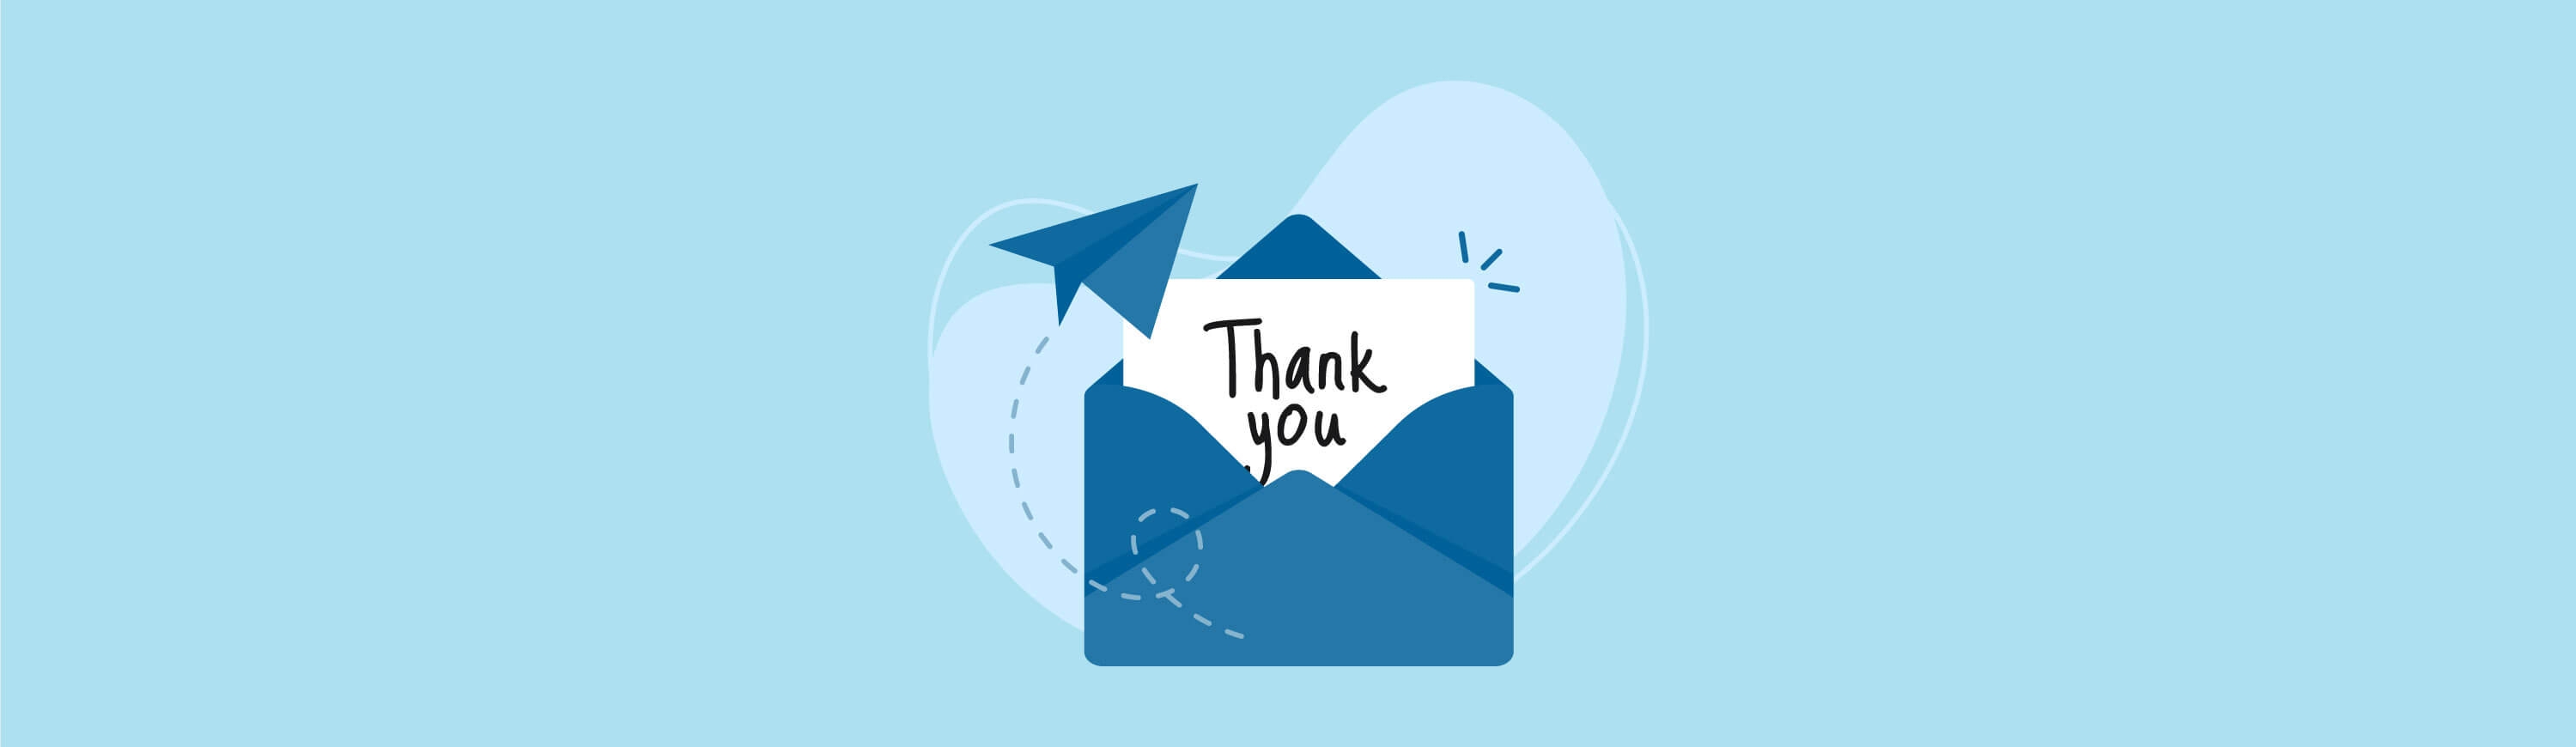 Illustration of an envelope with a thank you note sticking out of it.